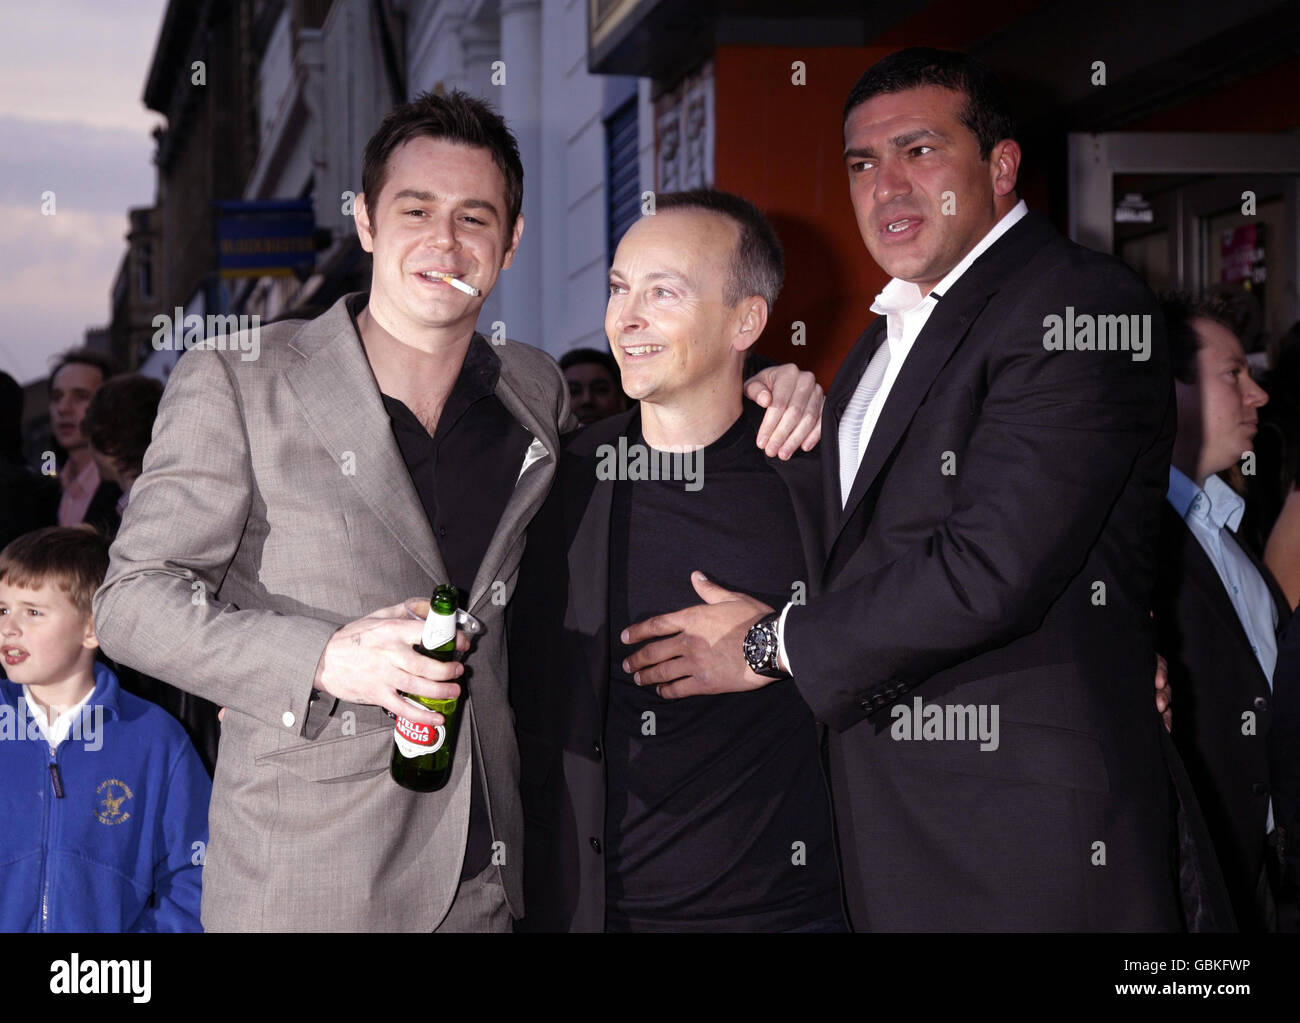 Stars of the film Tamer Hassan (right) and Danny Dyer (left) with the director Steve Kelly, arriving for the premiere of City Rats - during the East London Film Festival - at the Genesis cinema in east London. Stock Photo